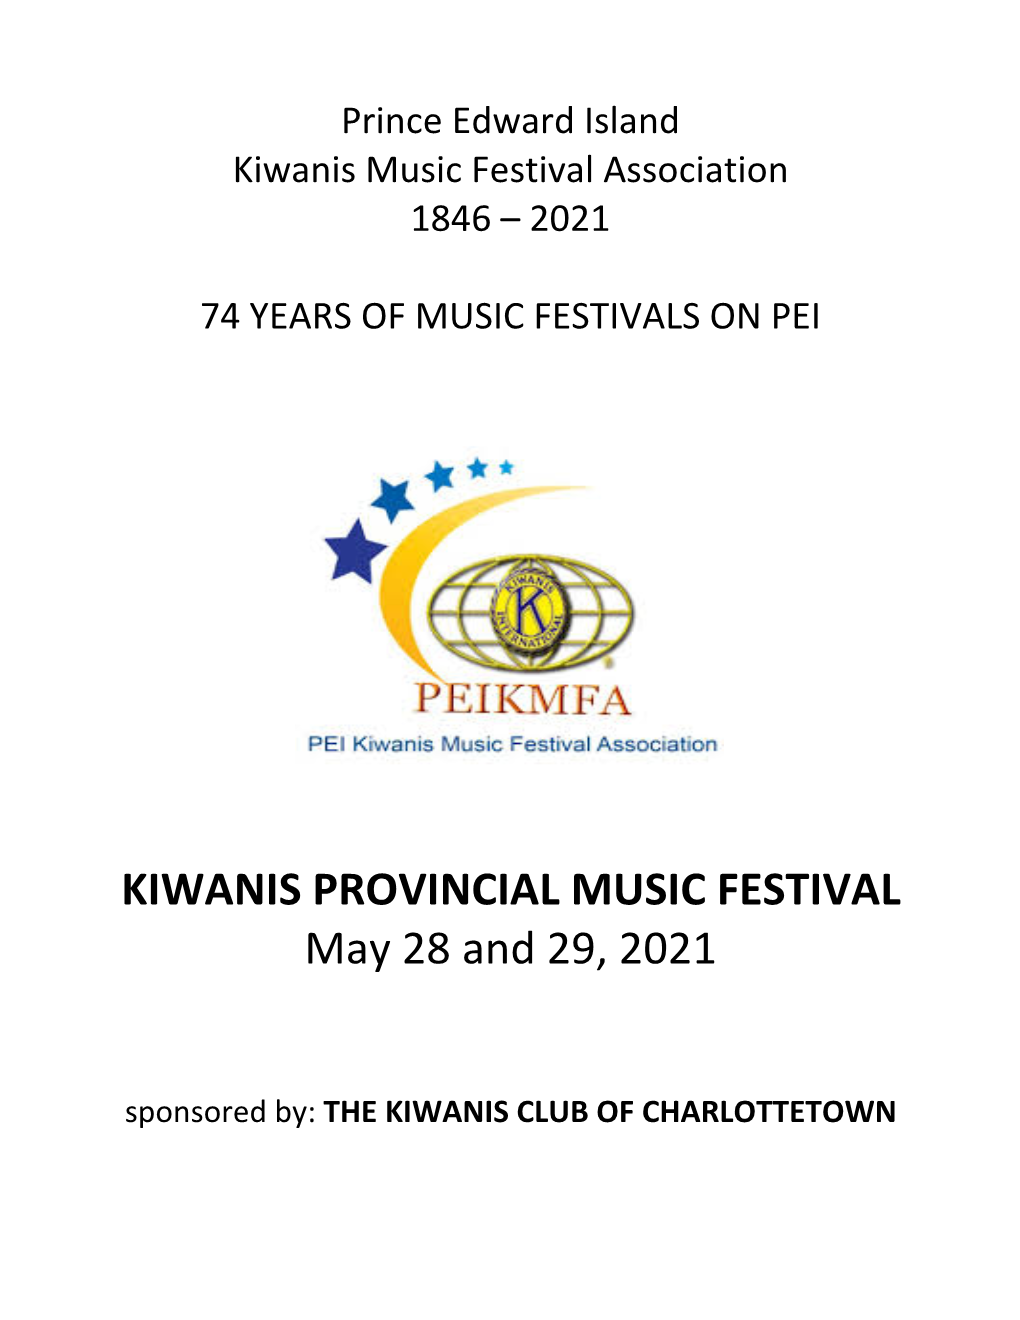 KIWANIS PROVINCIAL MUSIC FESTIVAL May 28 and 29, 2021